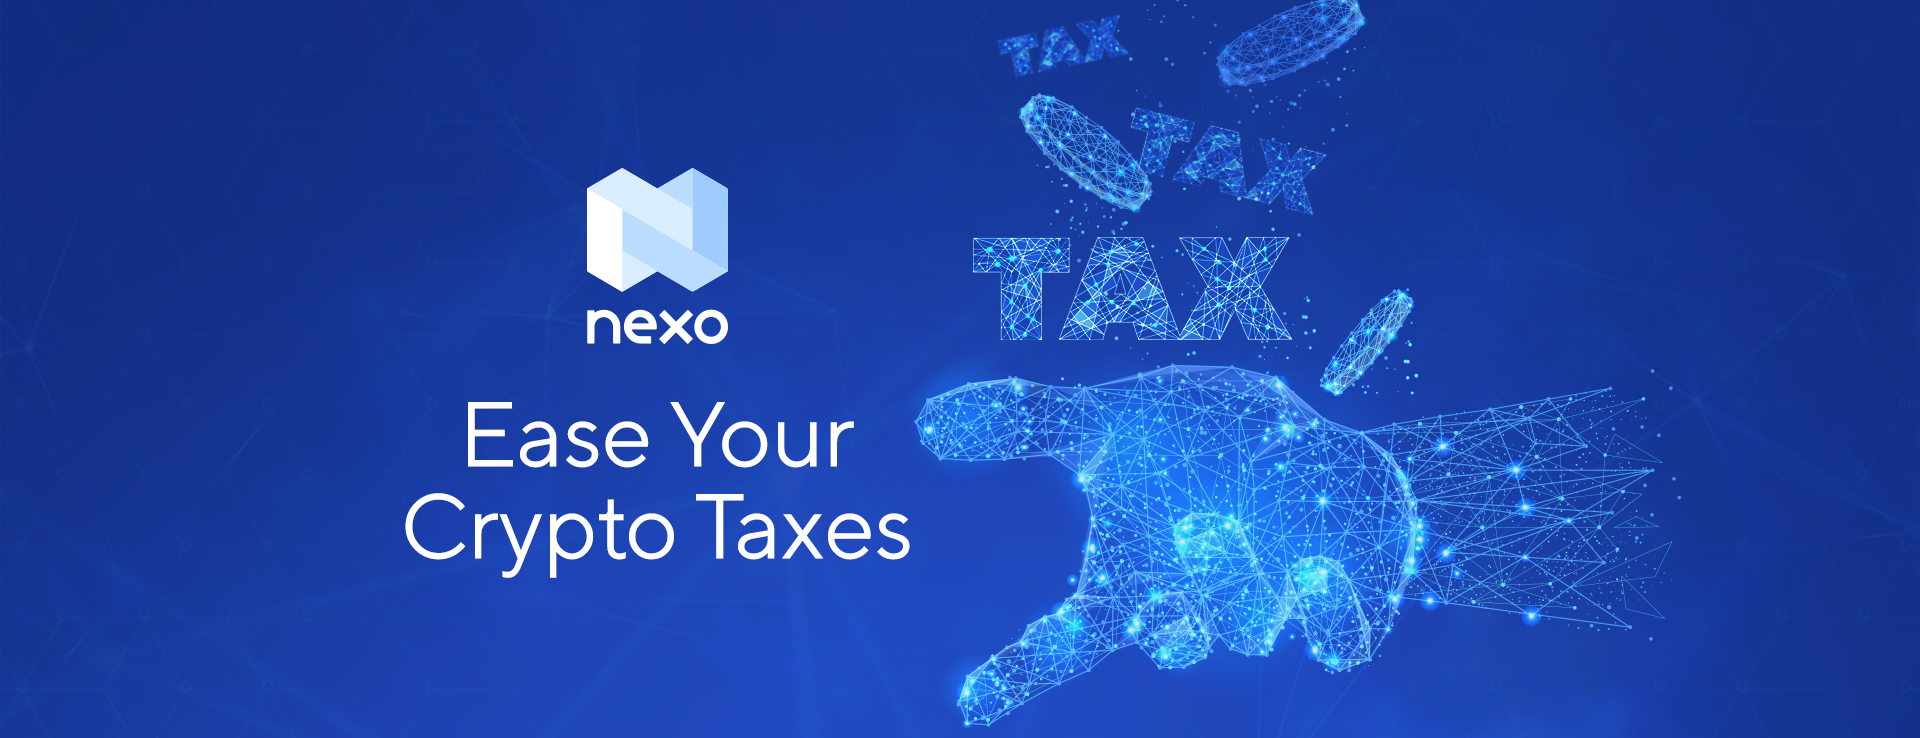 How To Ease Your Crypto Tax Burden